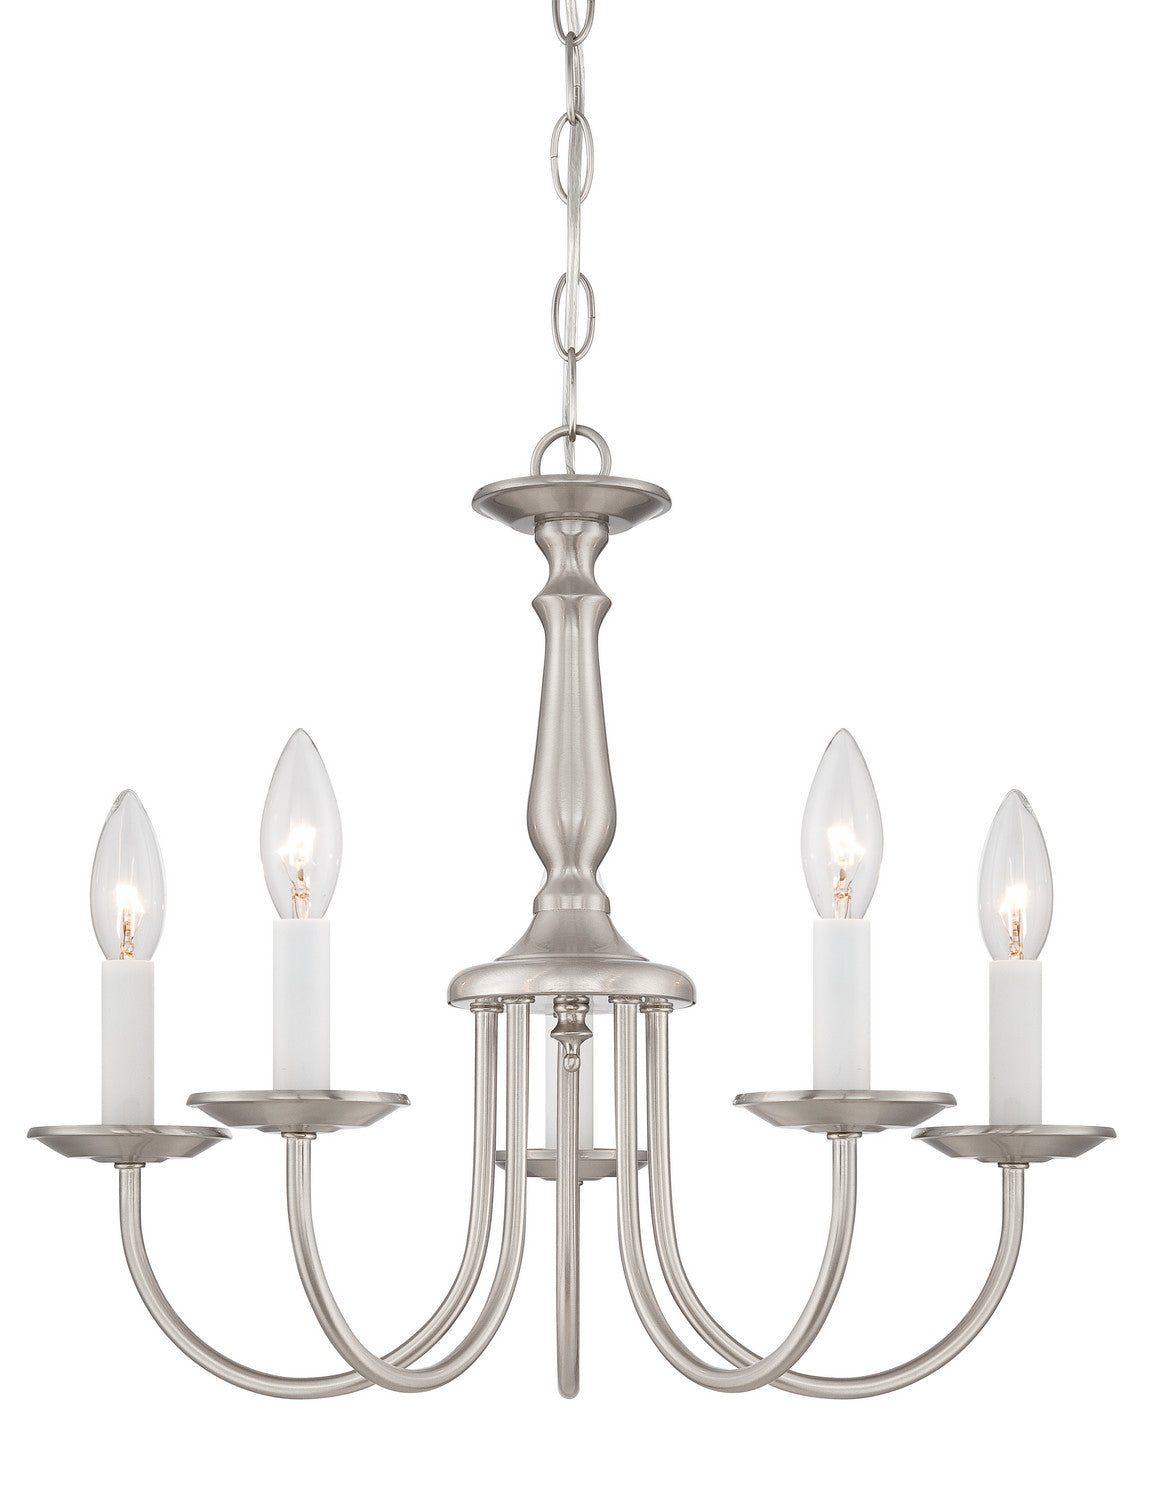 Chandelier Five Light Chandelier by Nuvo Lighting in Brushed Nickel Finish (60-1298)